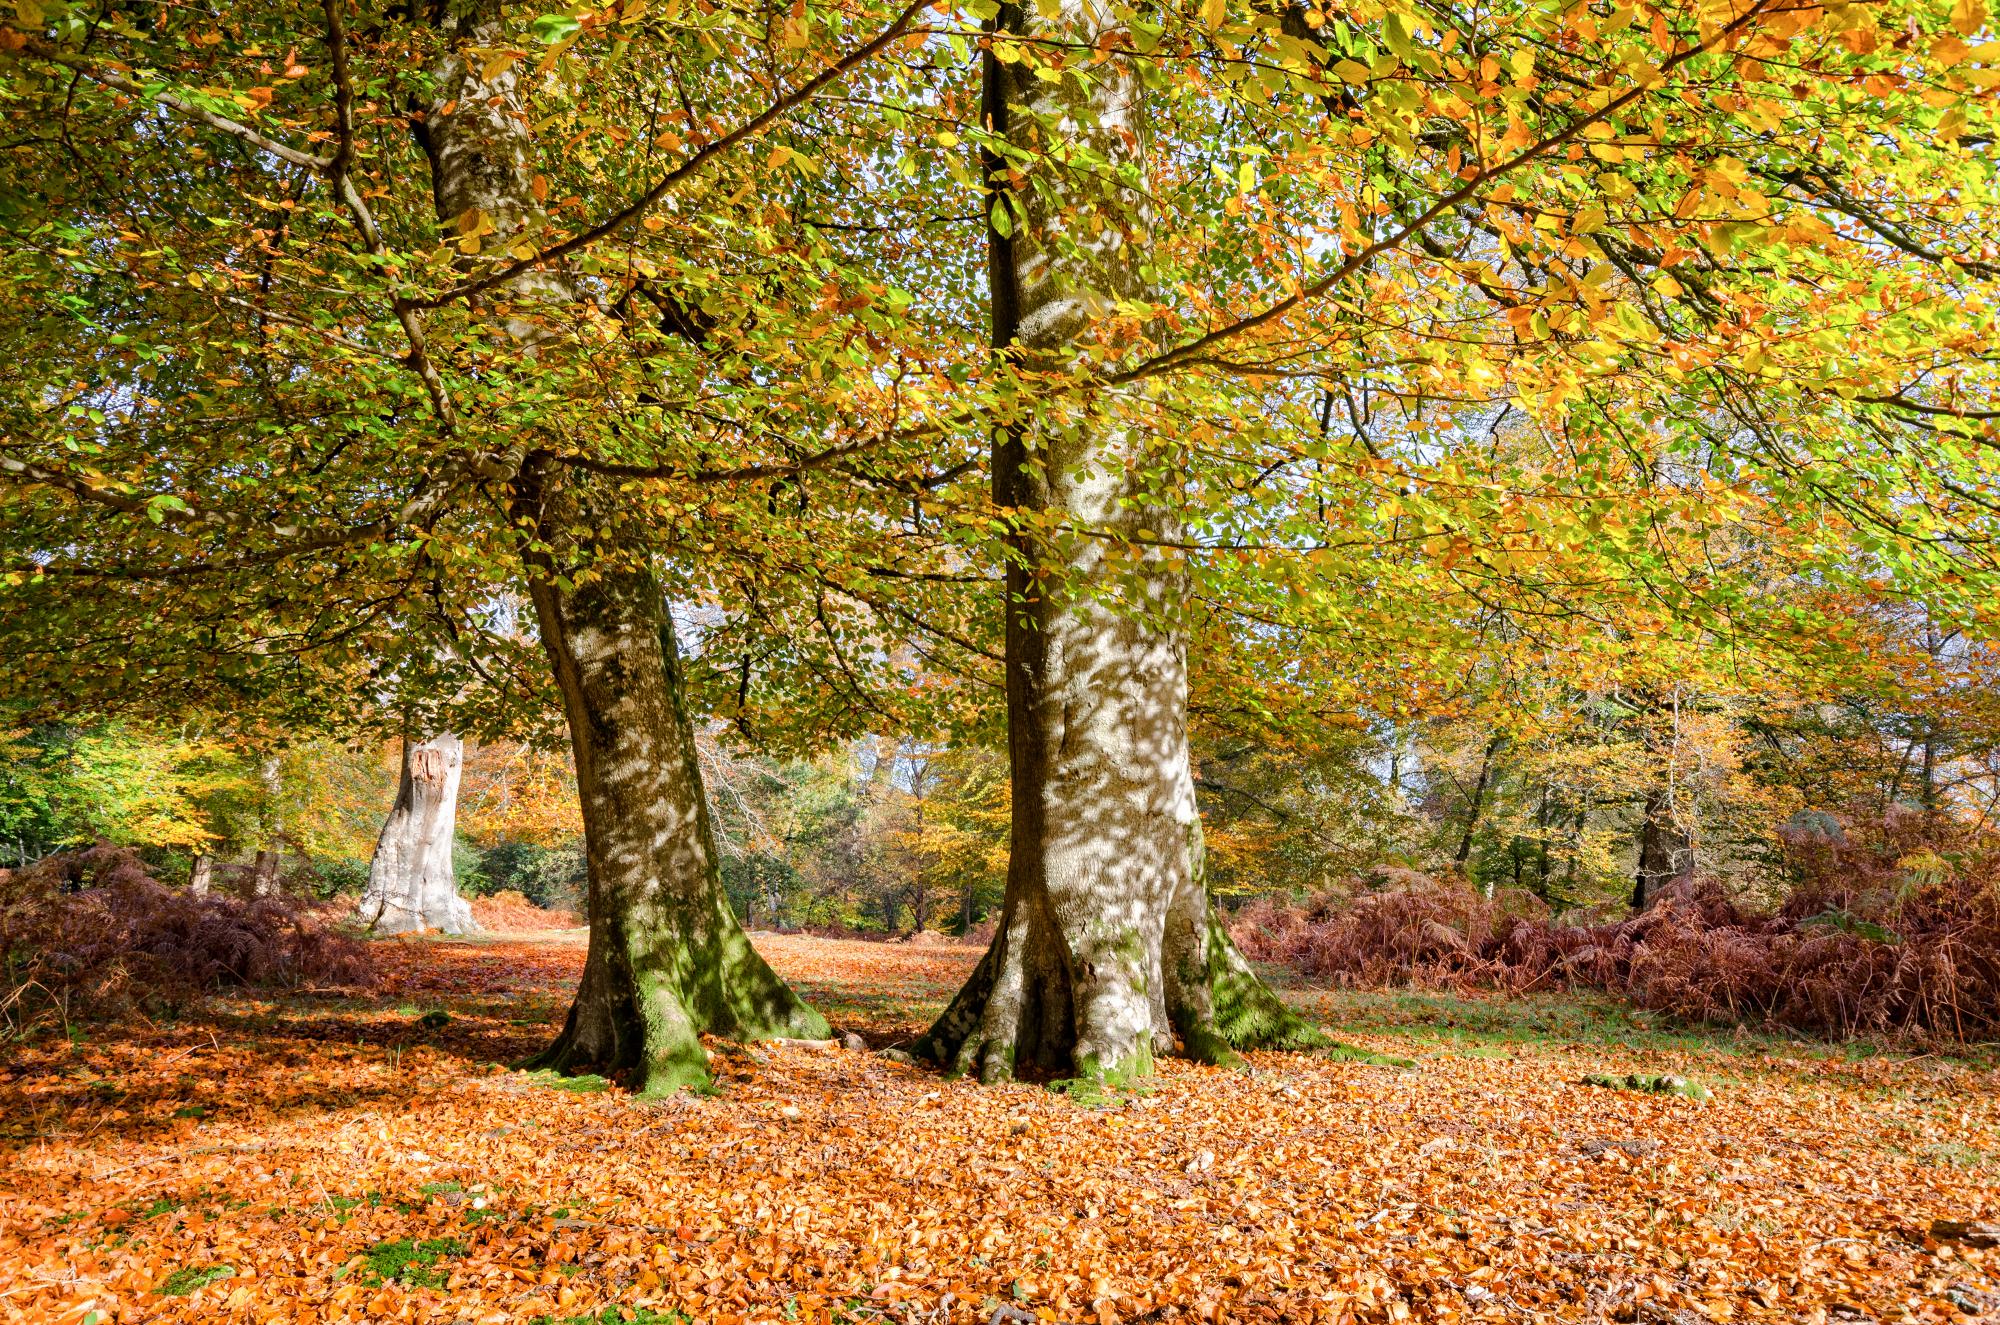 Beech tree surrounded by fallen autumnal leaves